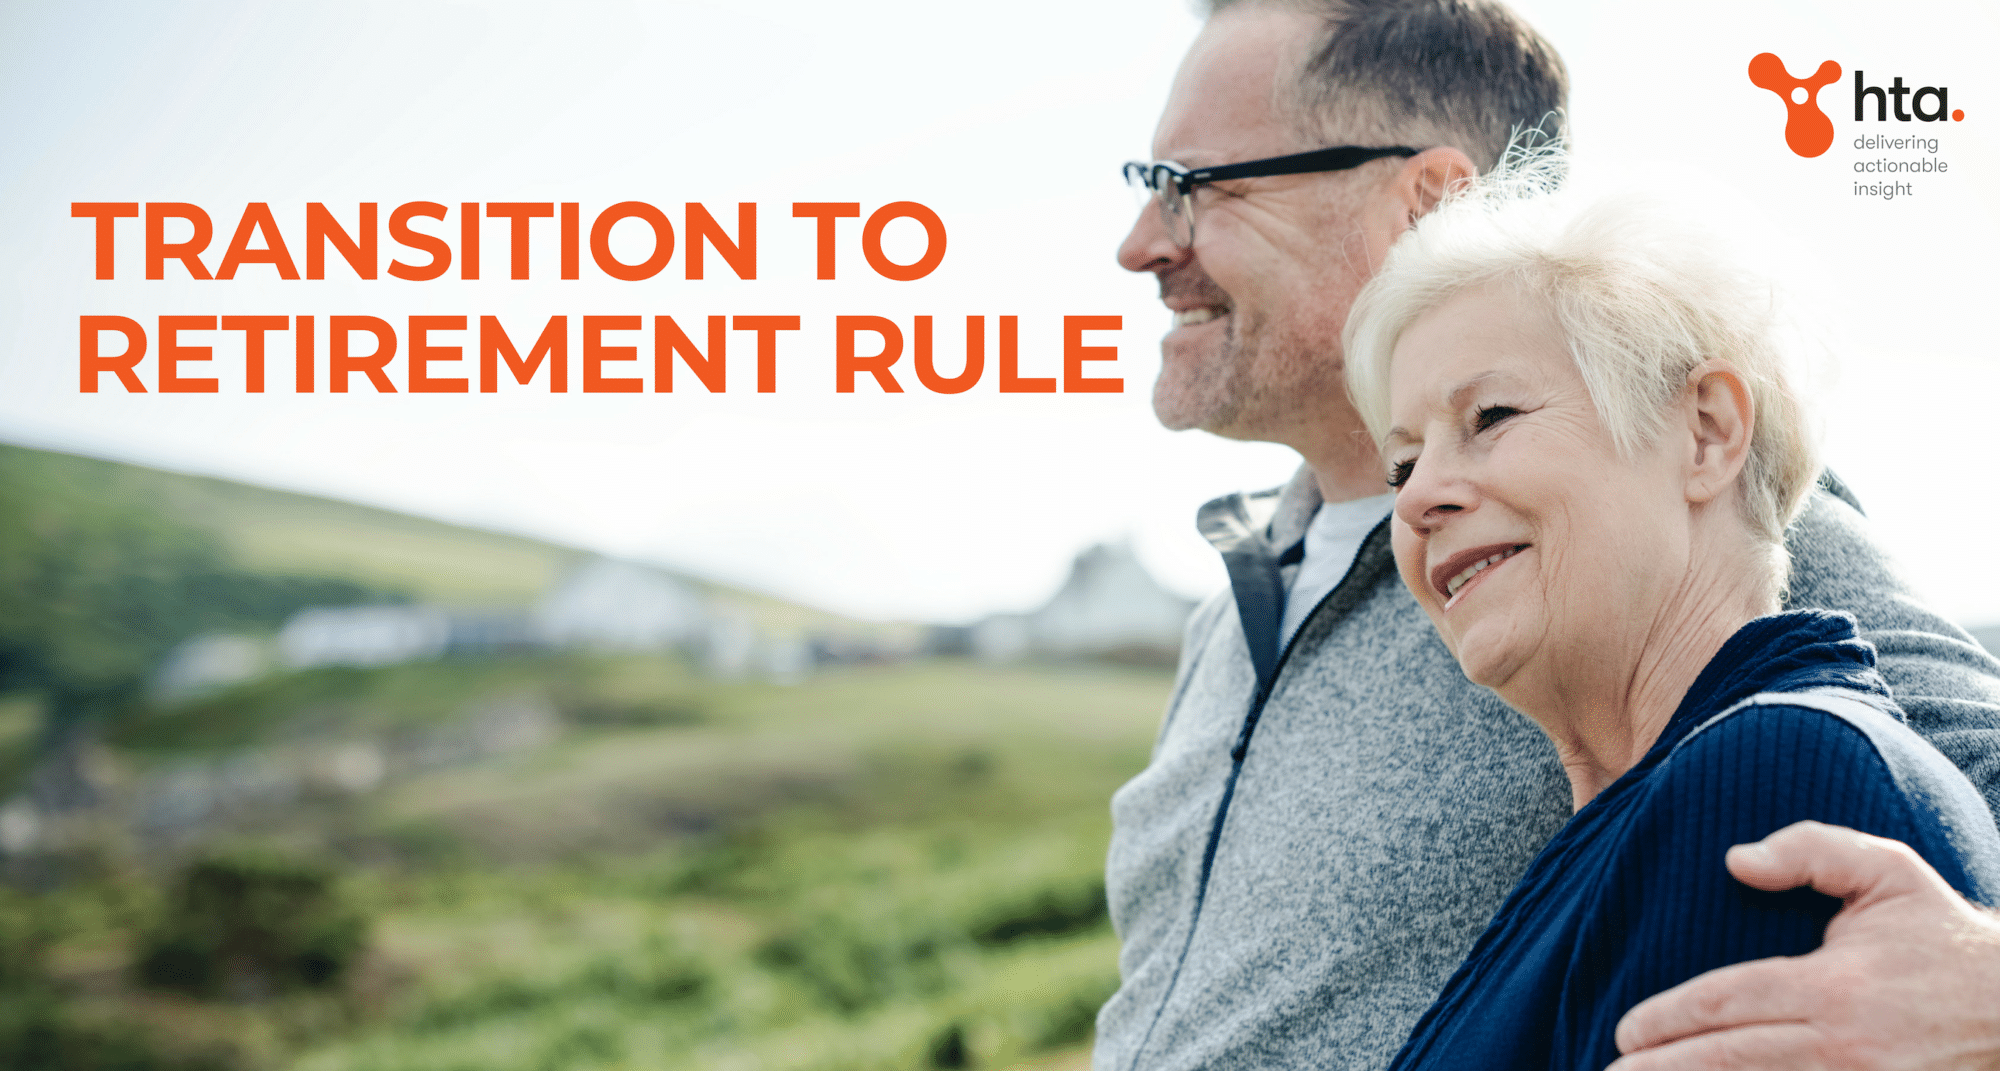 What is the “Transition to Retirement’ rule?